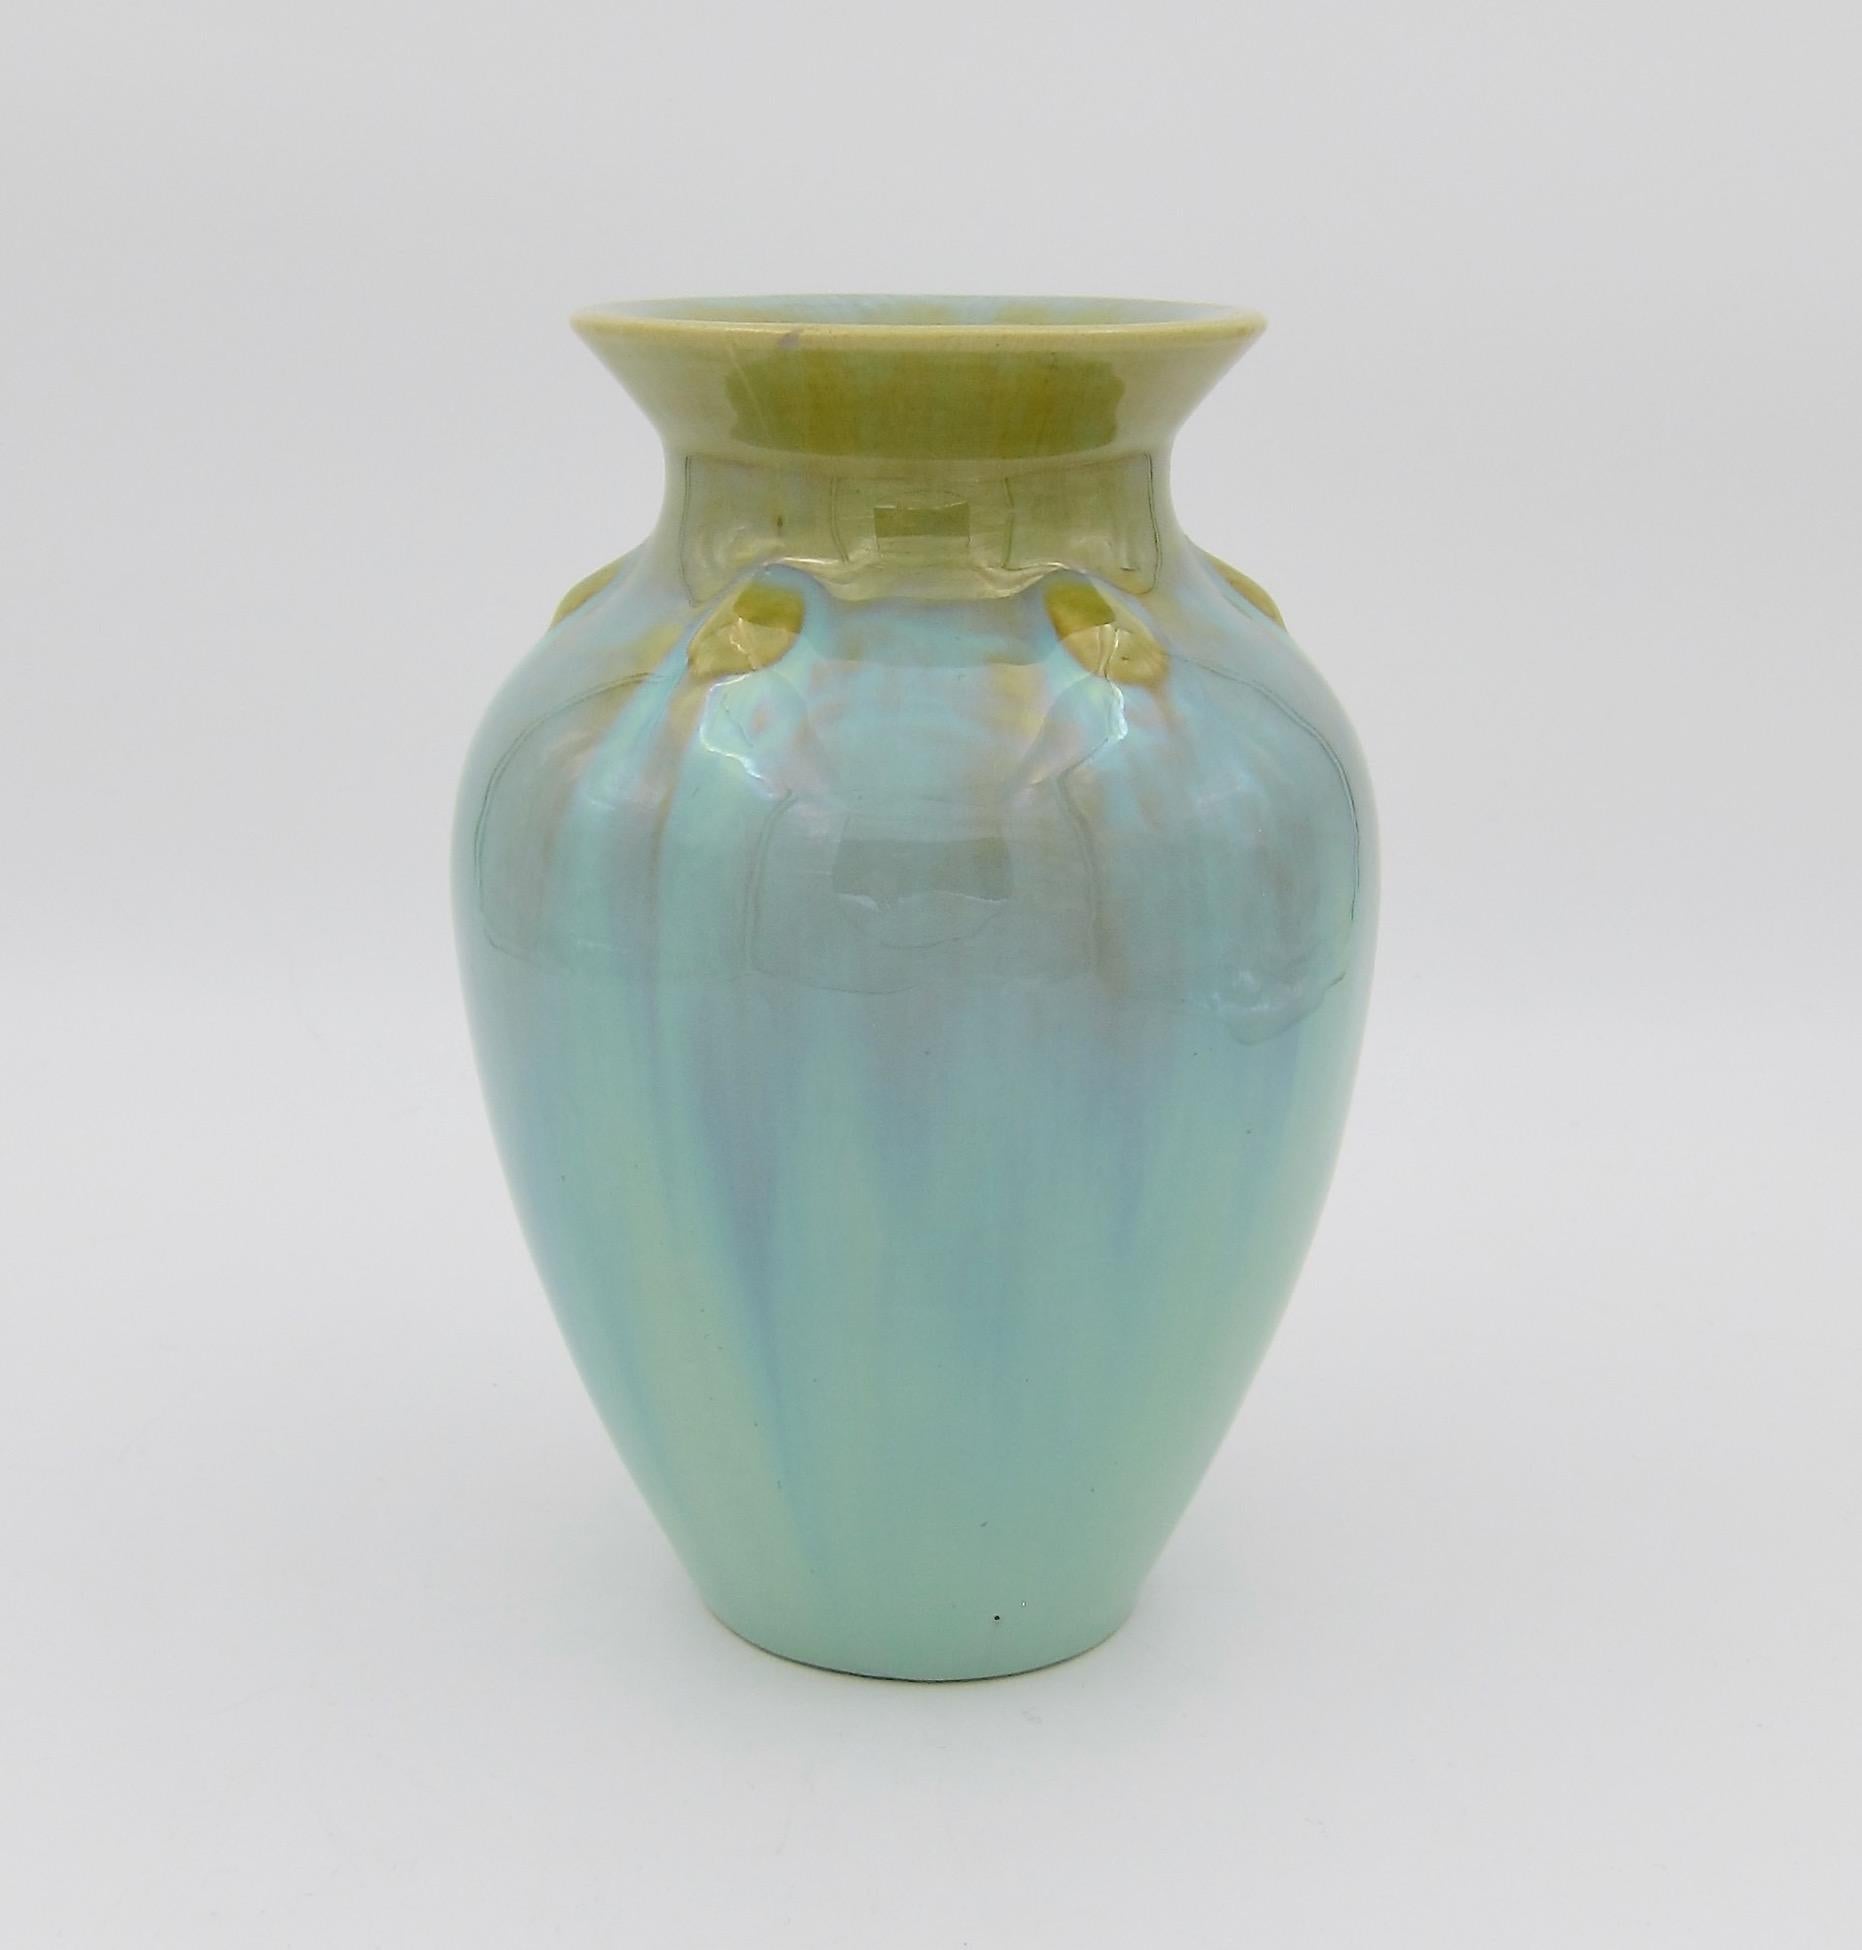 An early 20th century American art pottery vase from Fulper Pottery of Flemington, New Jersey. This is Fulper Pottery's form 532, an Arts & Crafts period vase decorated with an attractive flambé glaze in contrasting shades of frothy green and golden